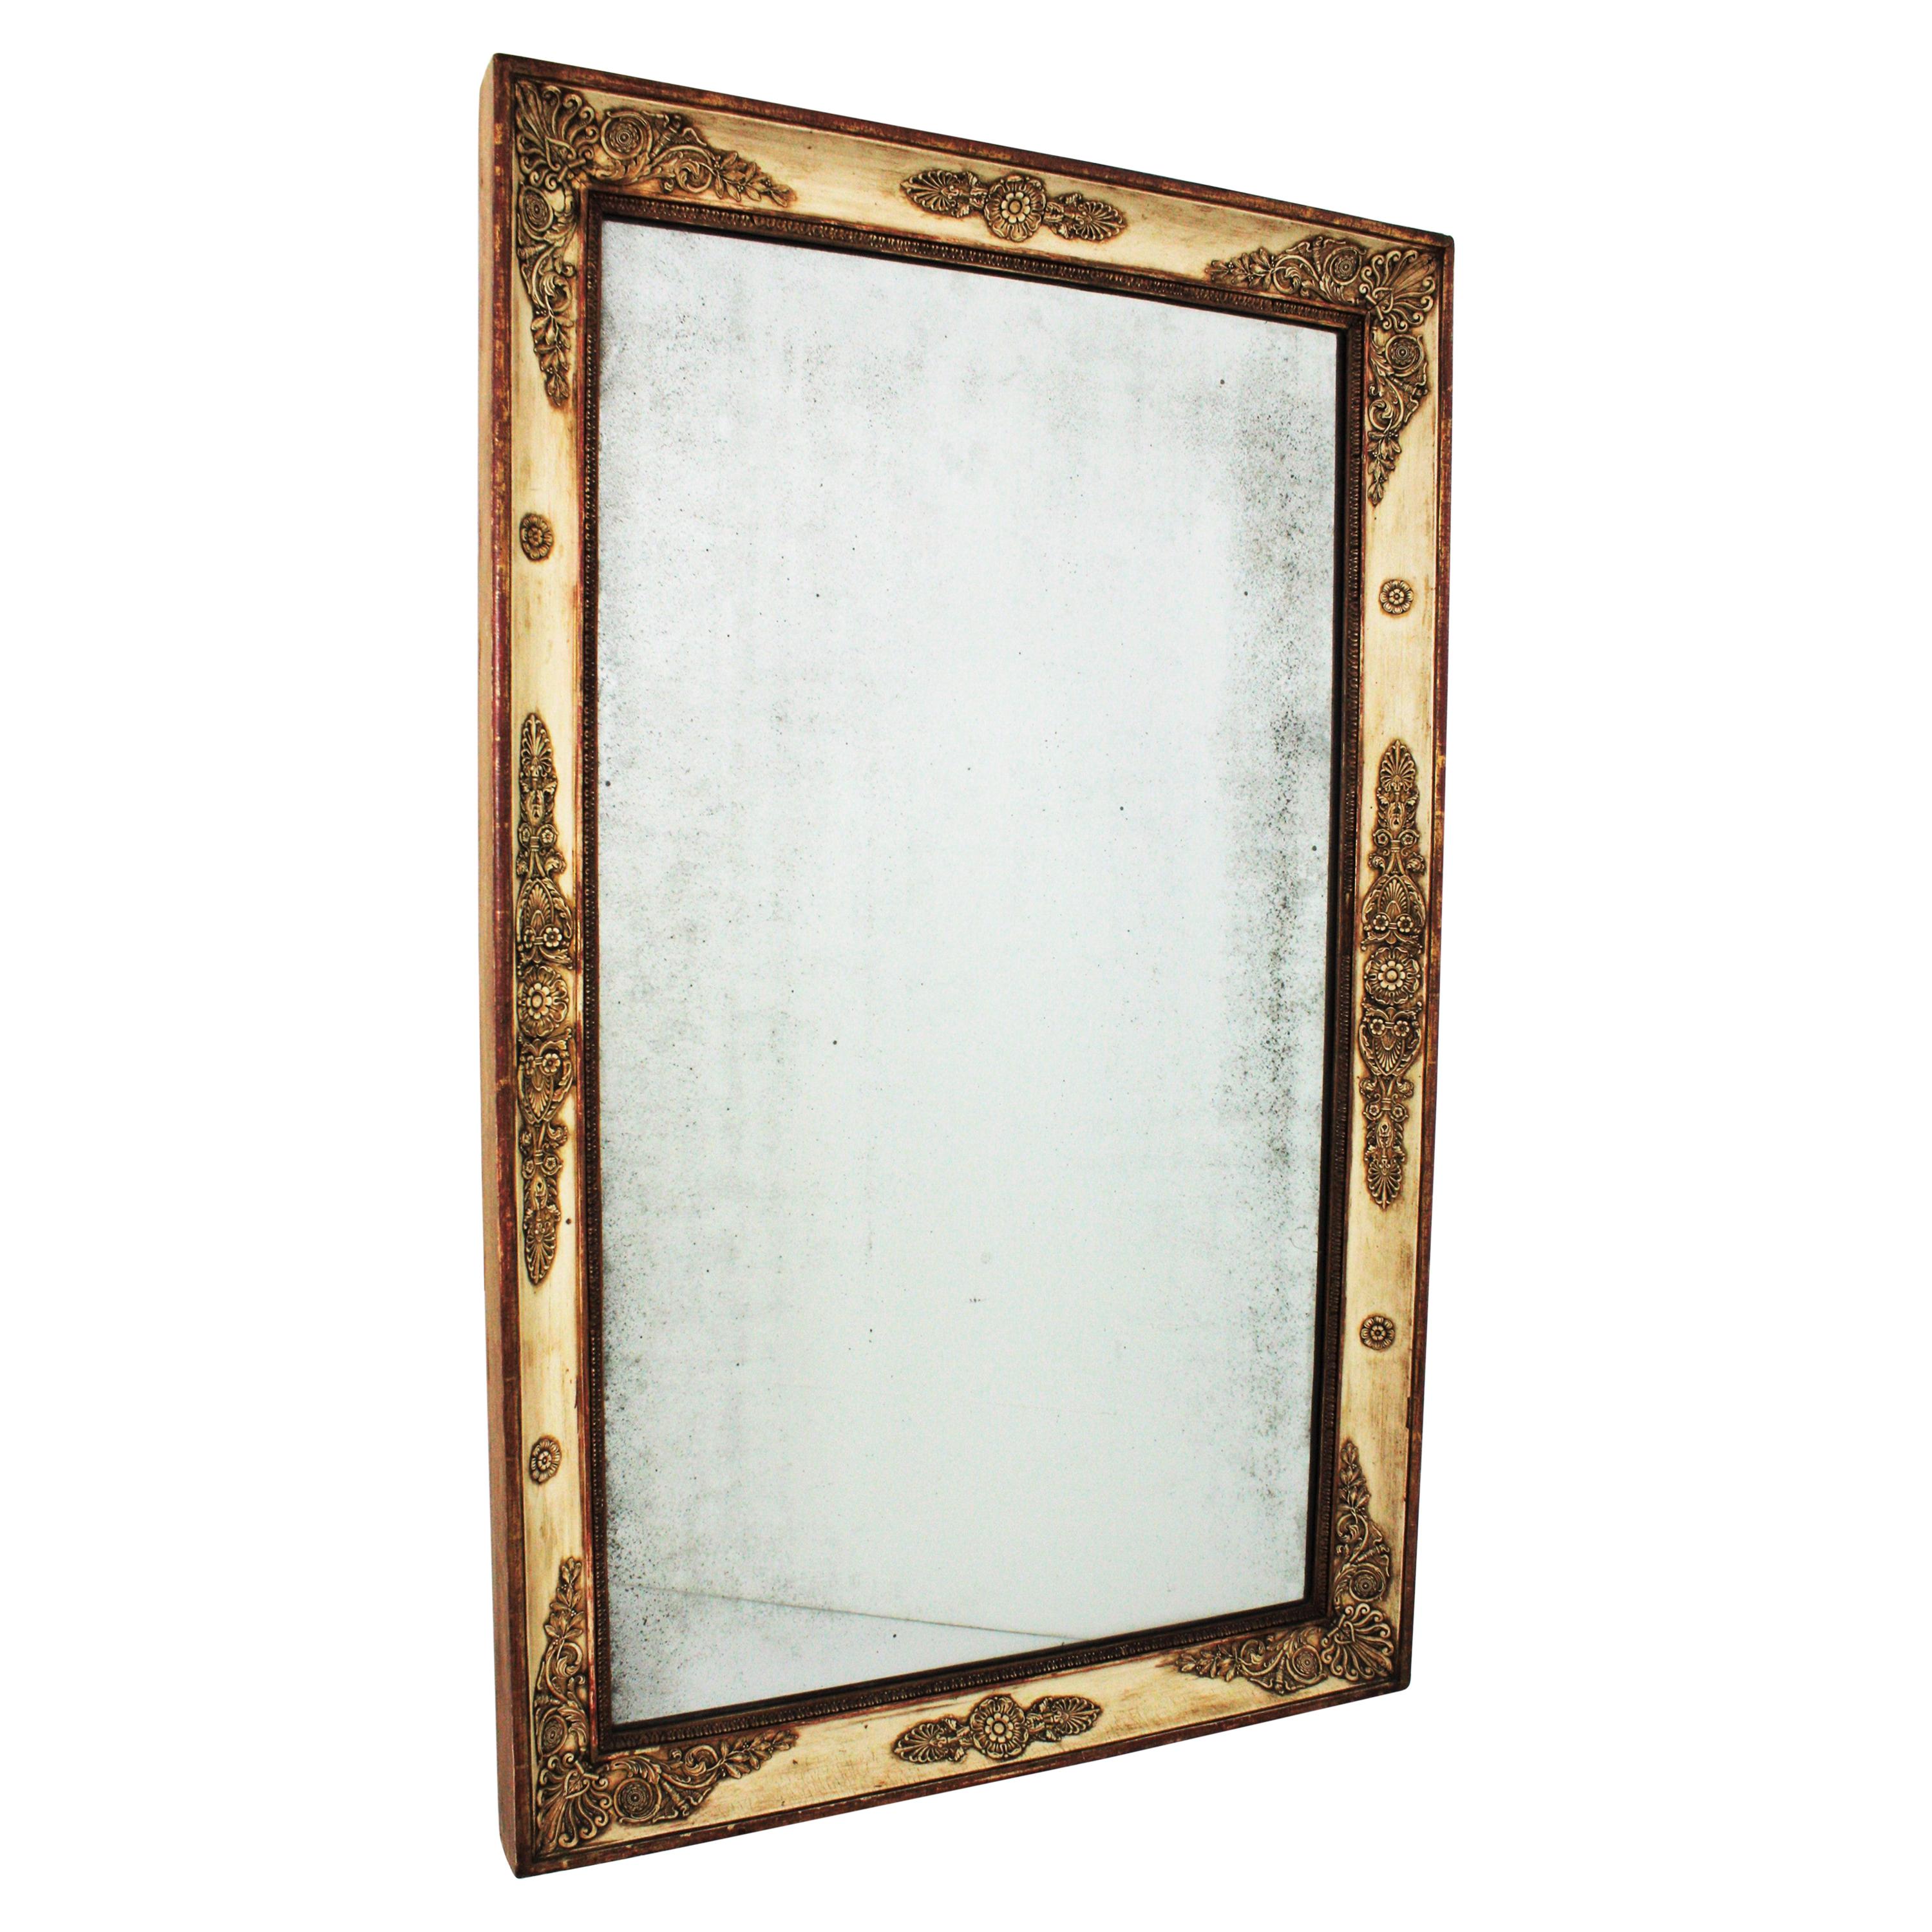 Large French Empire Parcel-Gilt and Beige Rectangular Mirror For Sale